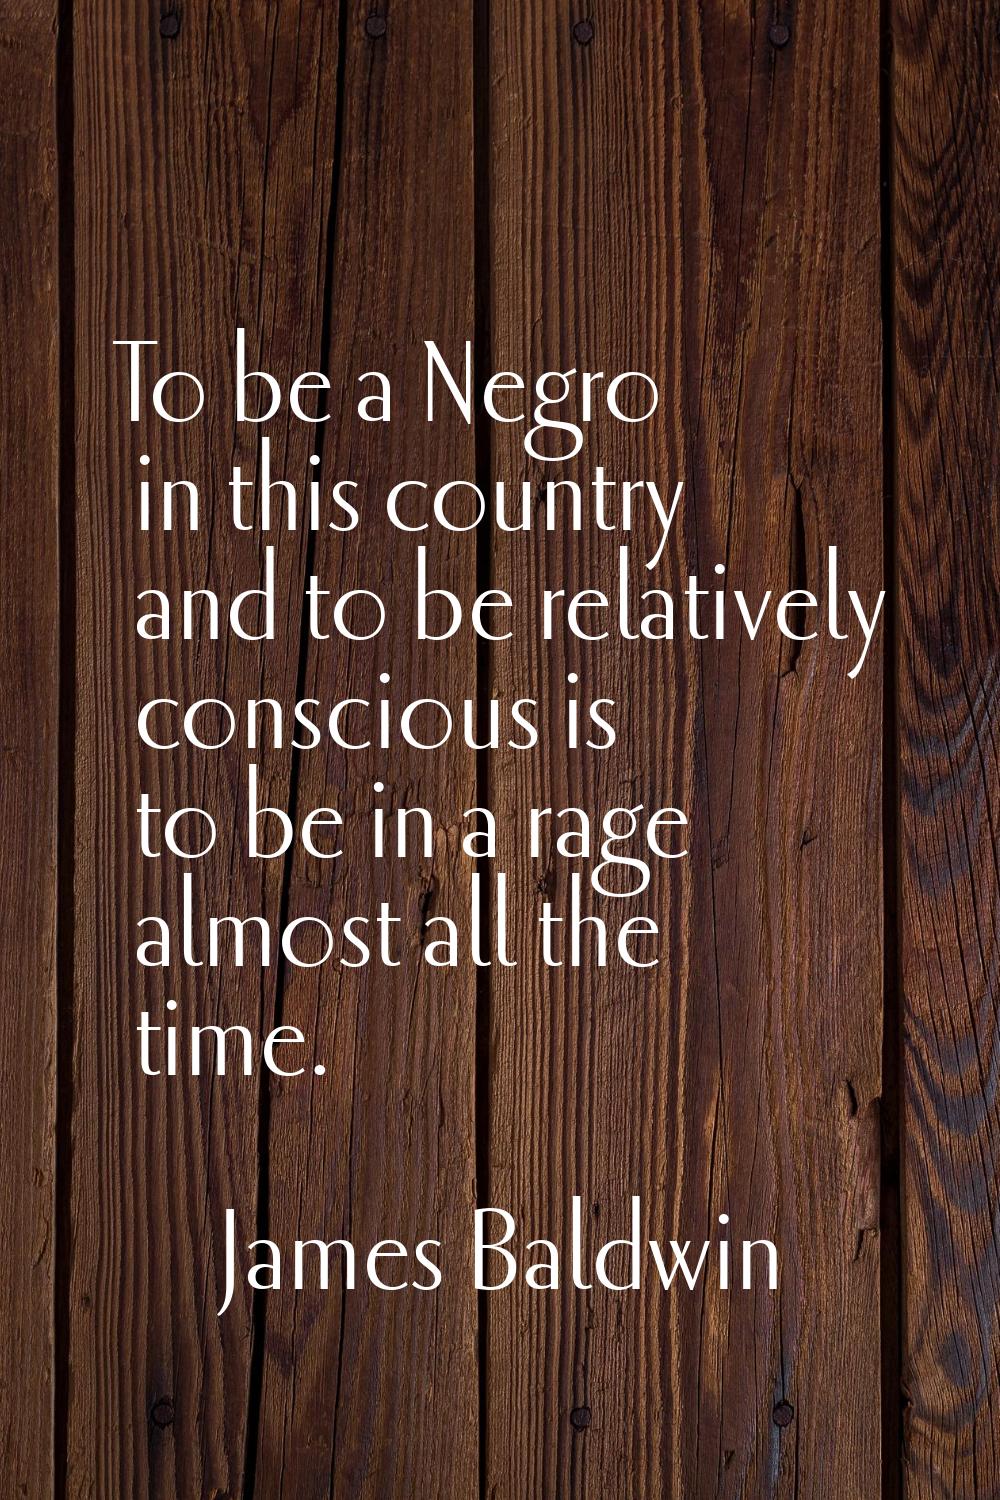 To be a Negro in this country and to be relatively conscious is to be in a rage almost all the time